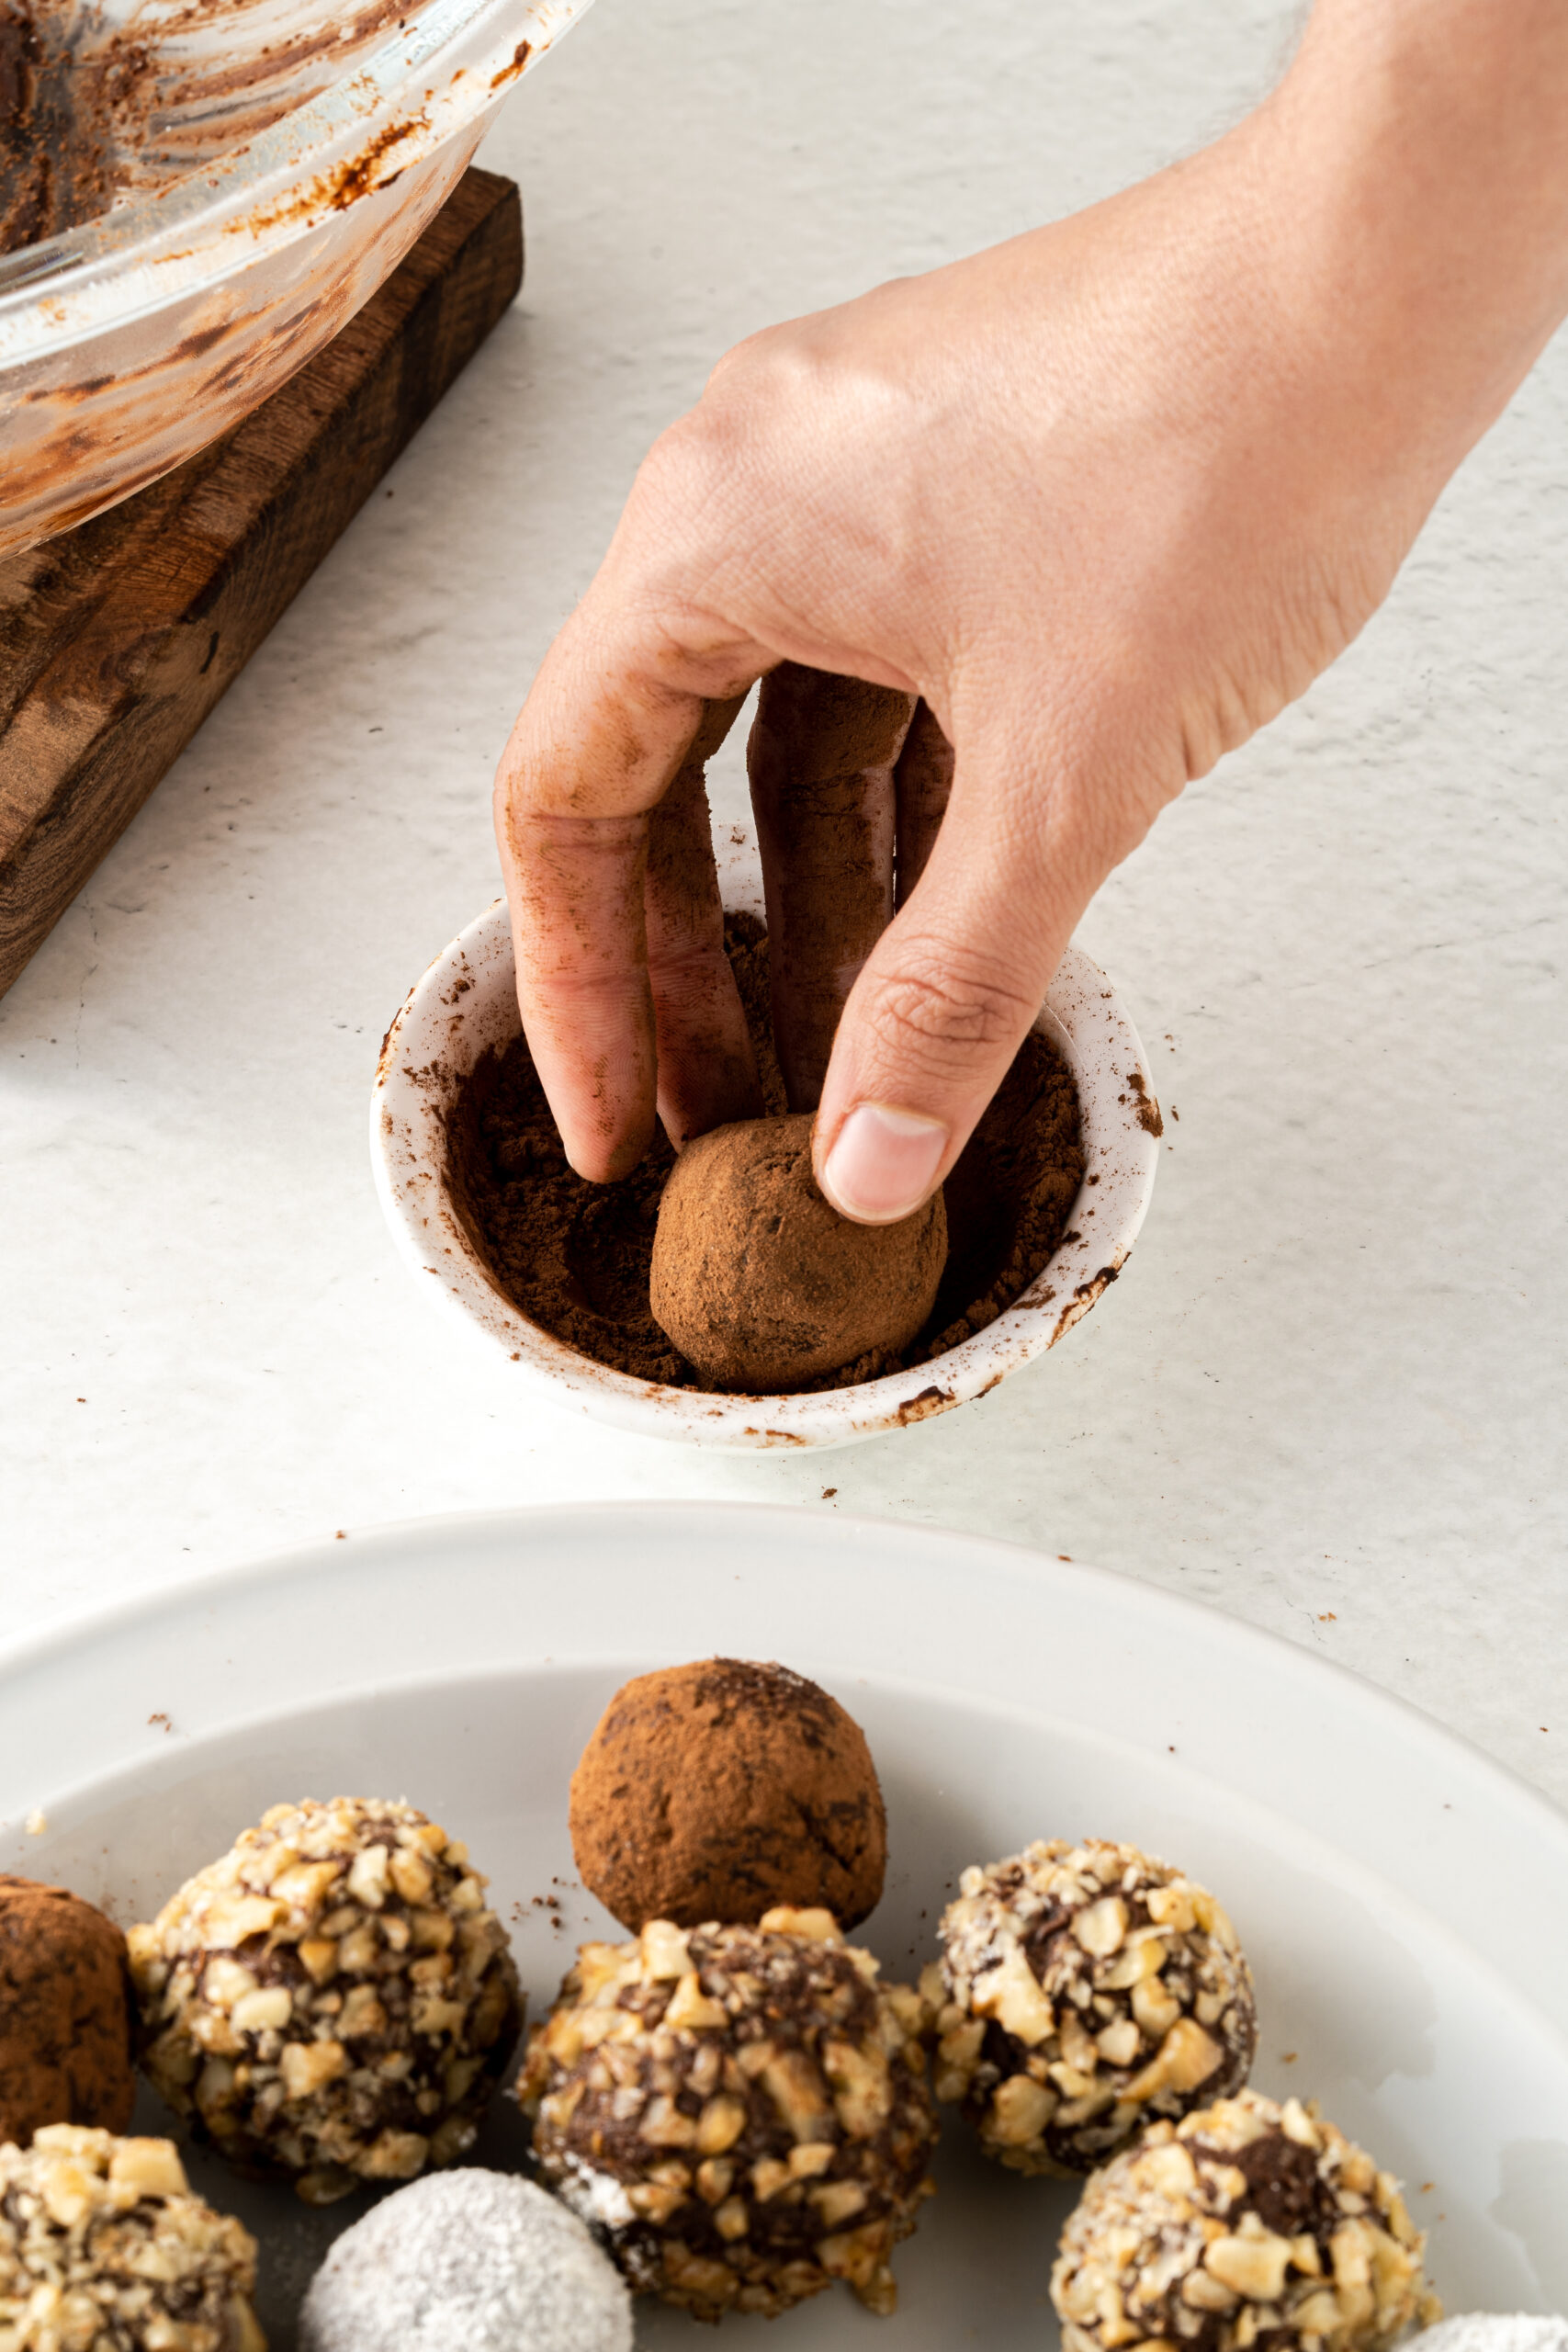 Hand rolling chocolate truffle in a cacao mixture.